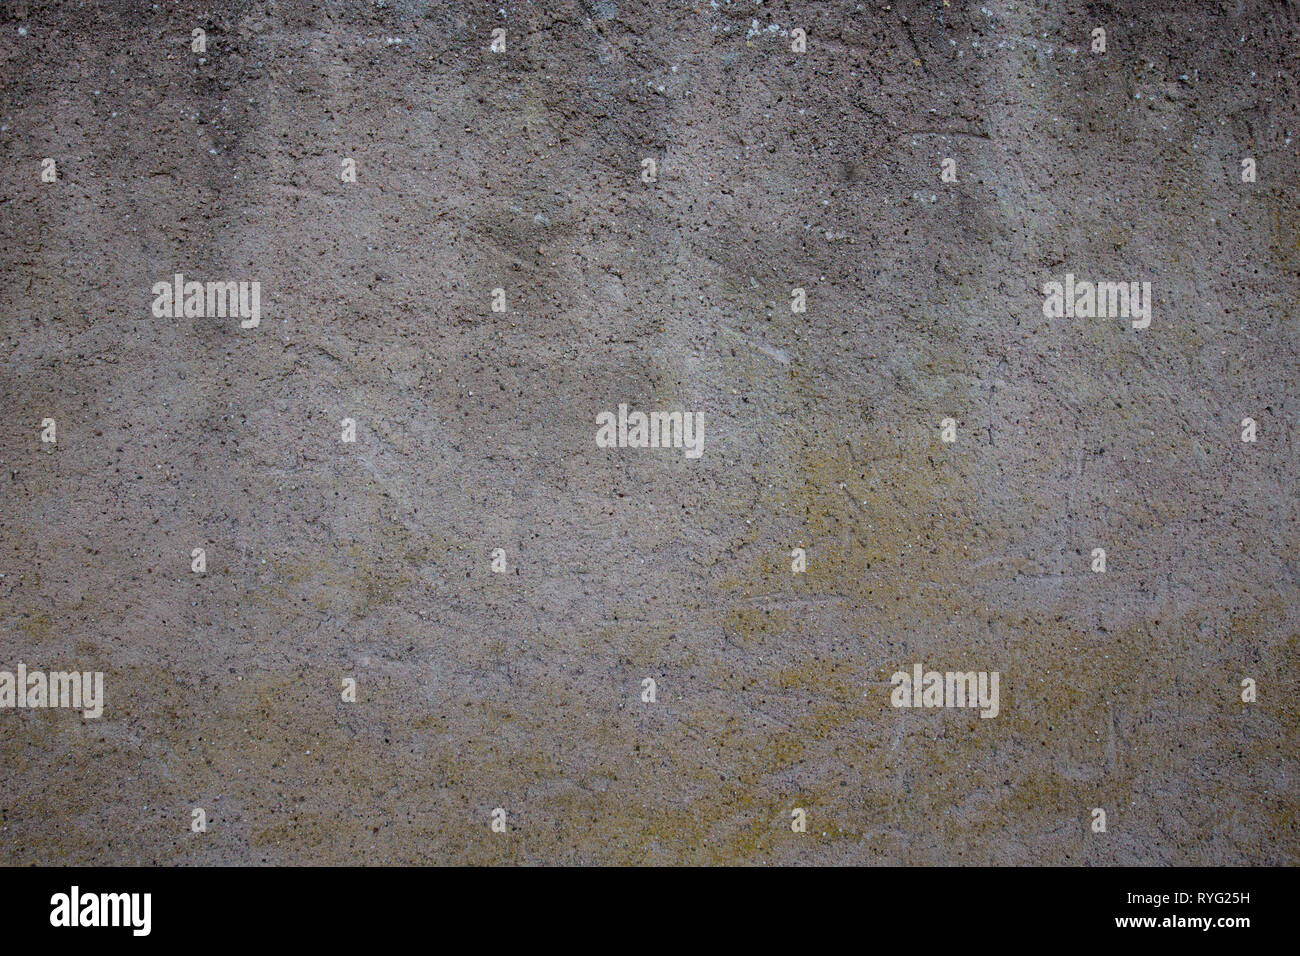 Abstract background grey concrete wall texture. Cement grunge seamless pattern. Rock fence or road structure with scratches. Stock Photo